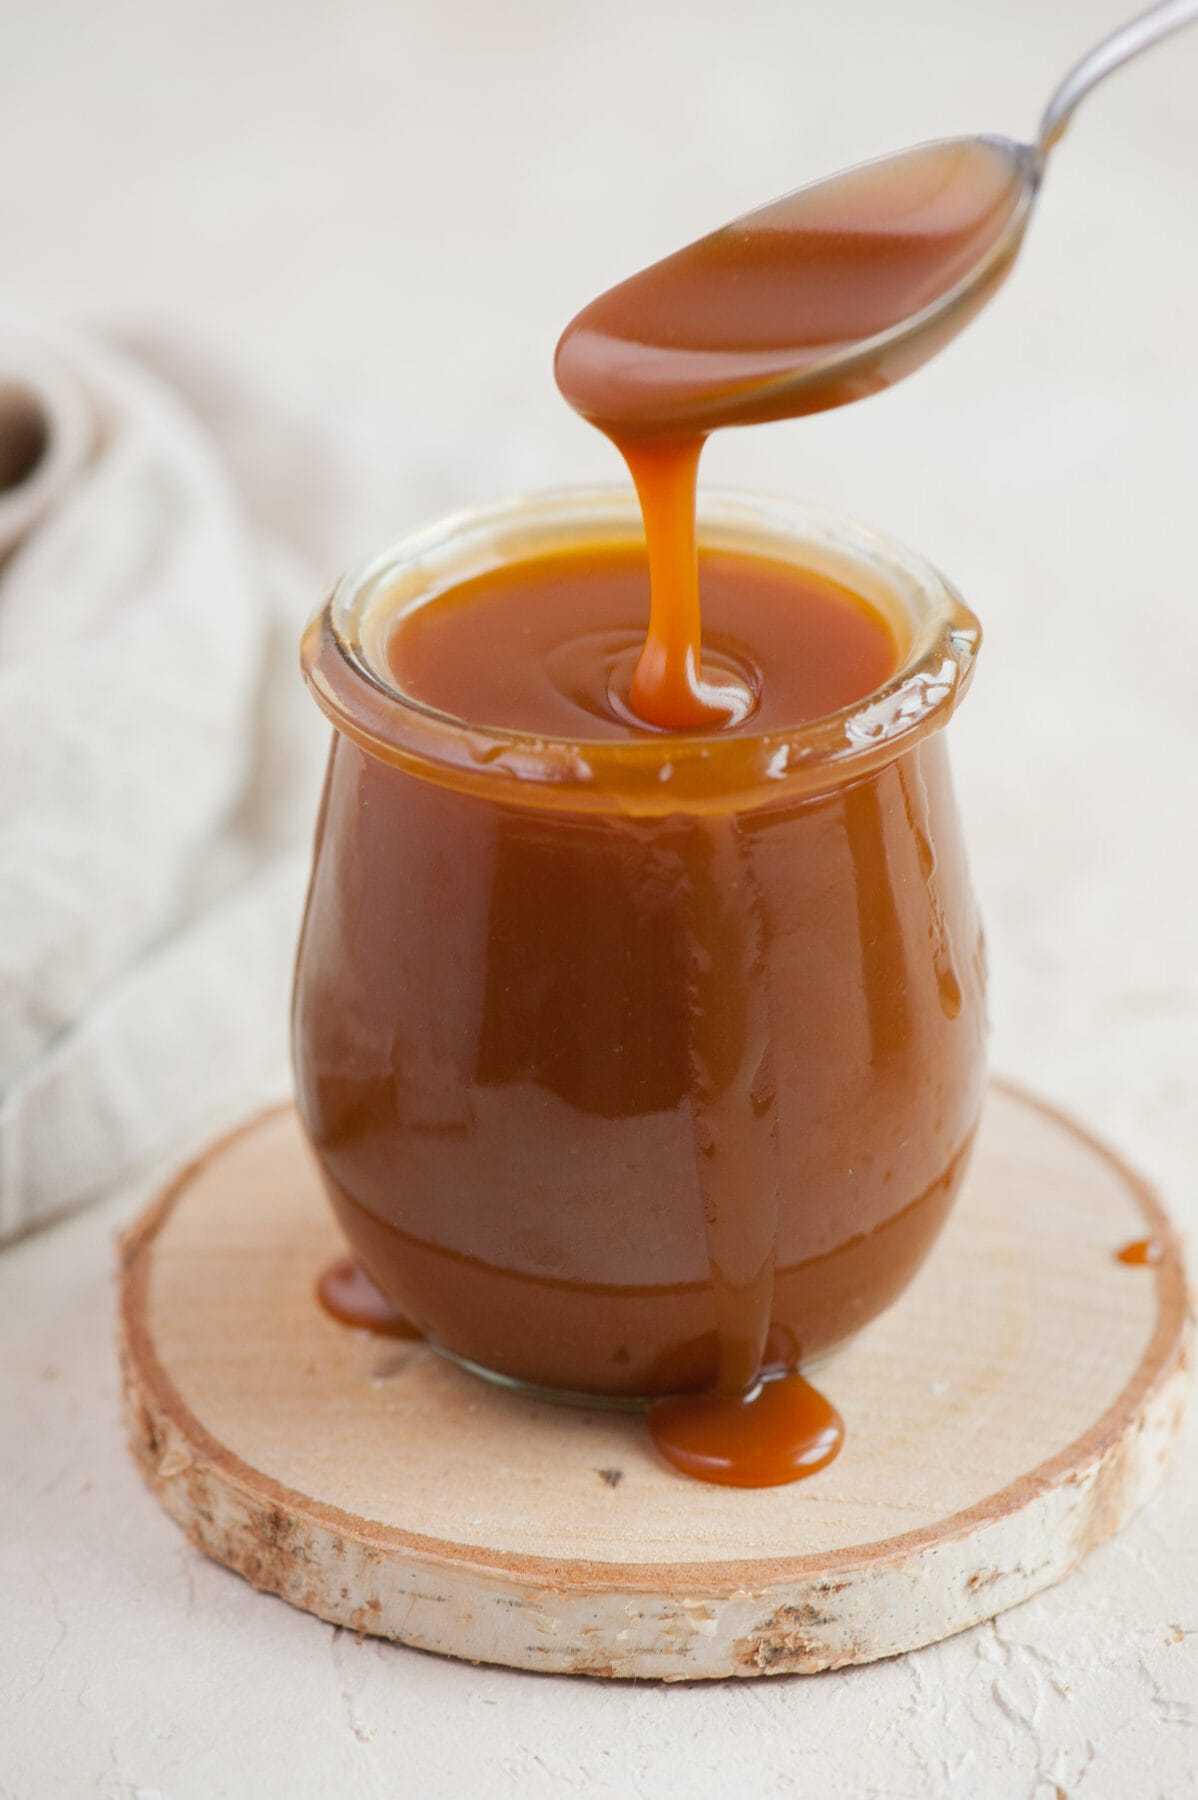 Salted caramel sauce is being poured from a teaspoon to a jar.